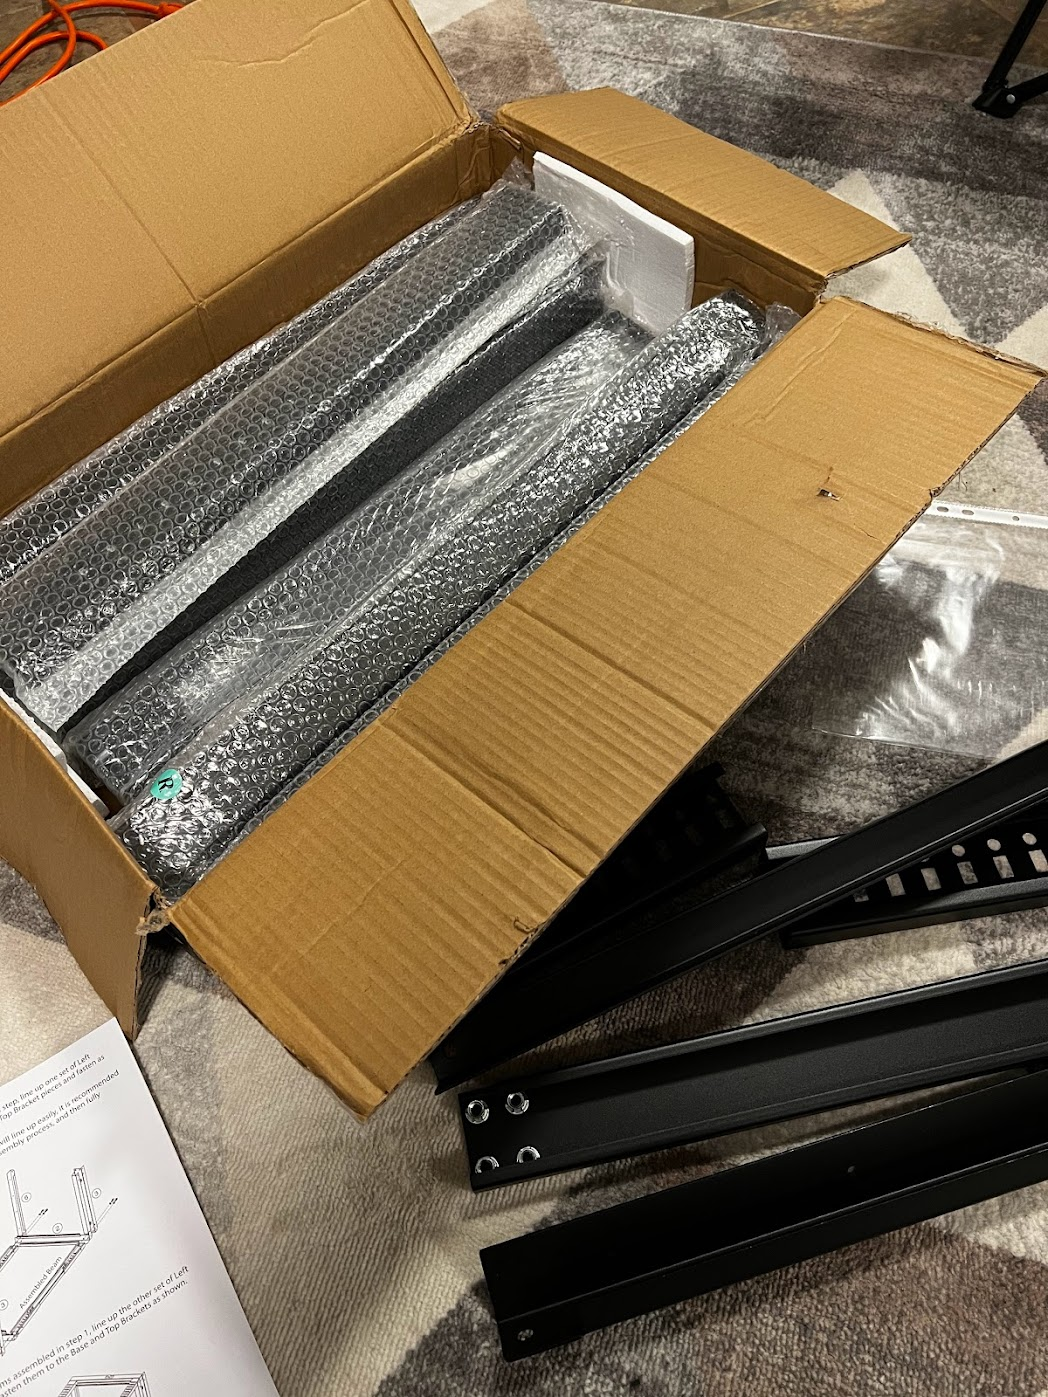 Amazon box containing all the metal pieces for the server rack